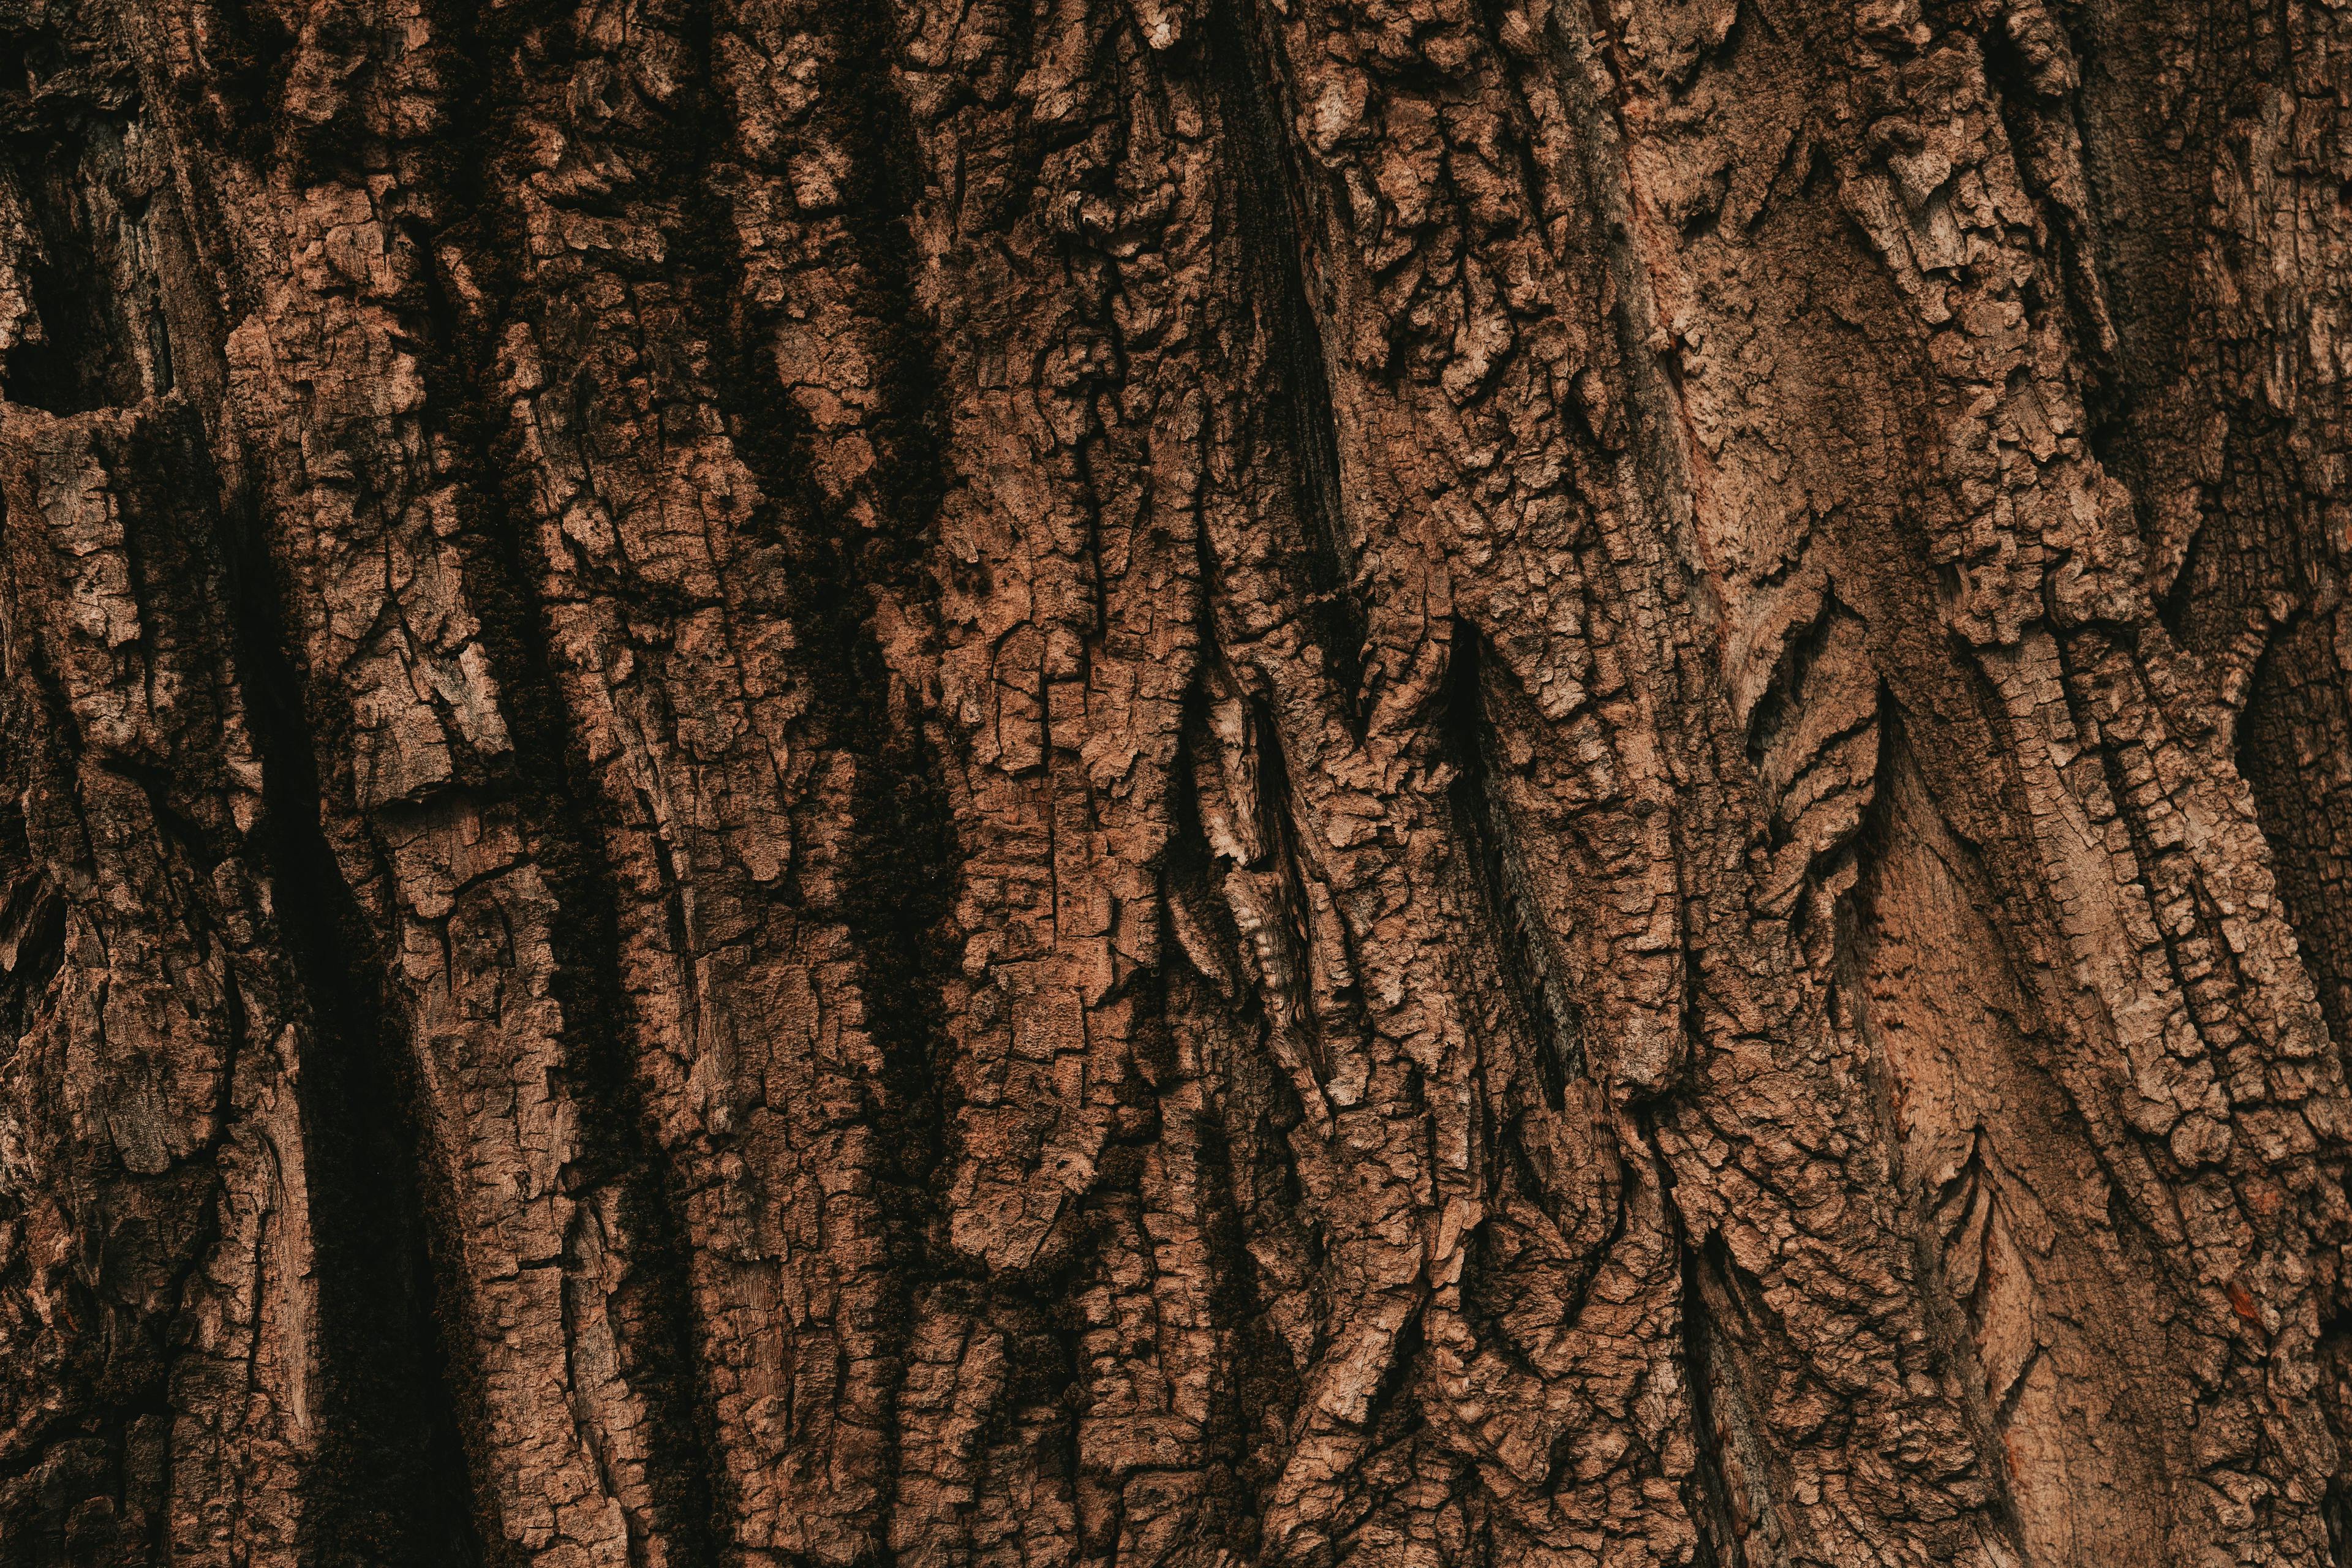 Tree bark texture pattern, old maple wood trunk as background | Image Credit: © Bits and Splits - stock.adobe.com